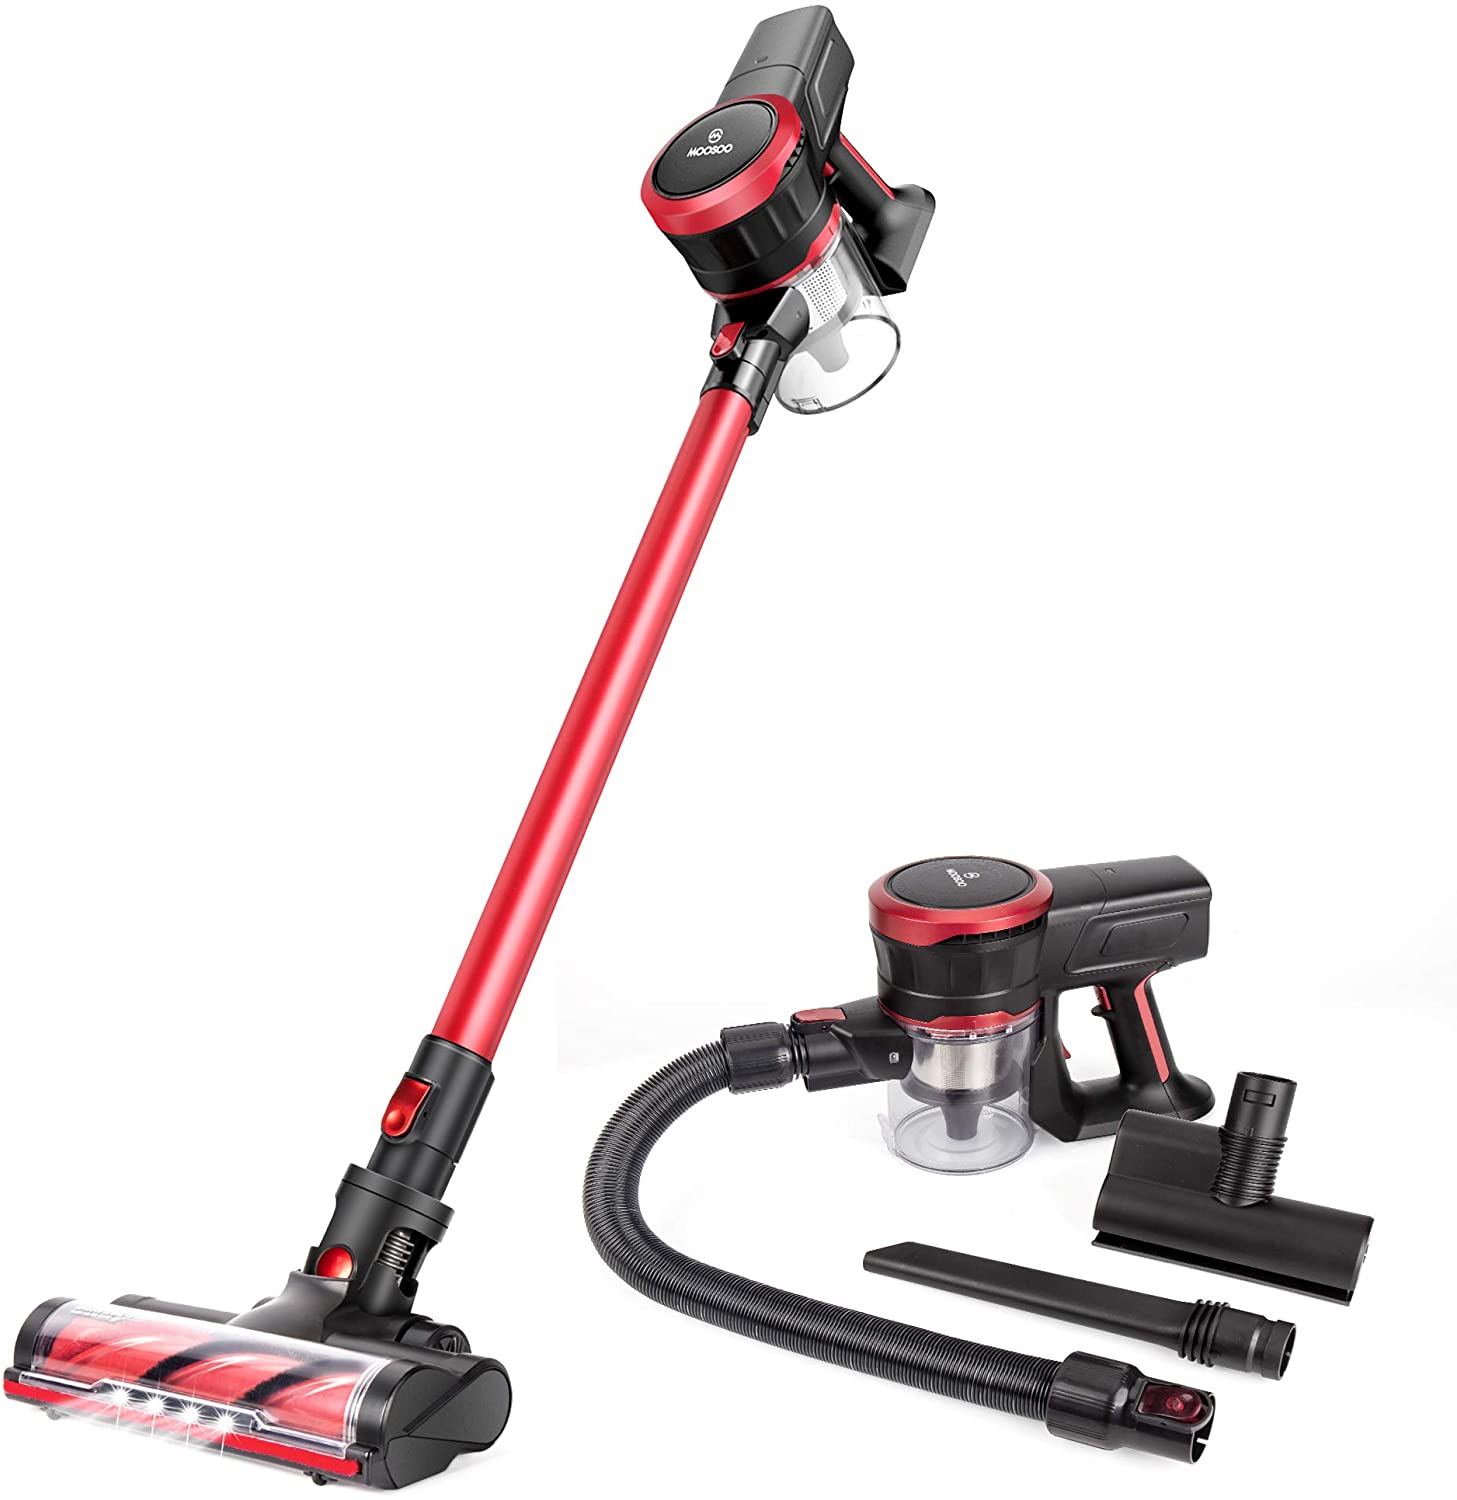 The Best Cordless Vacuum For Workshop August 2021